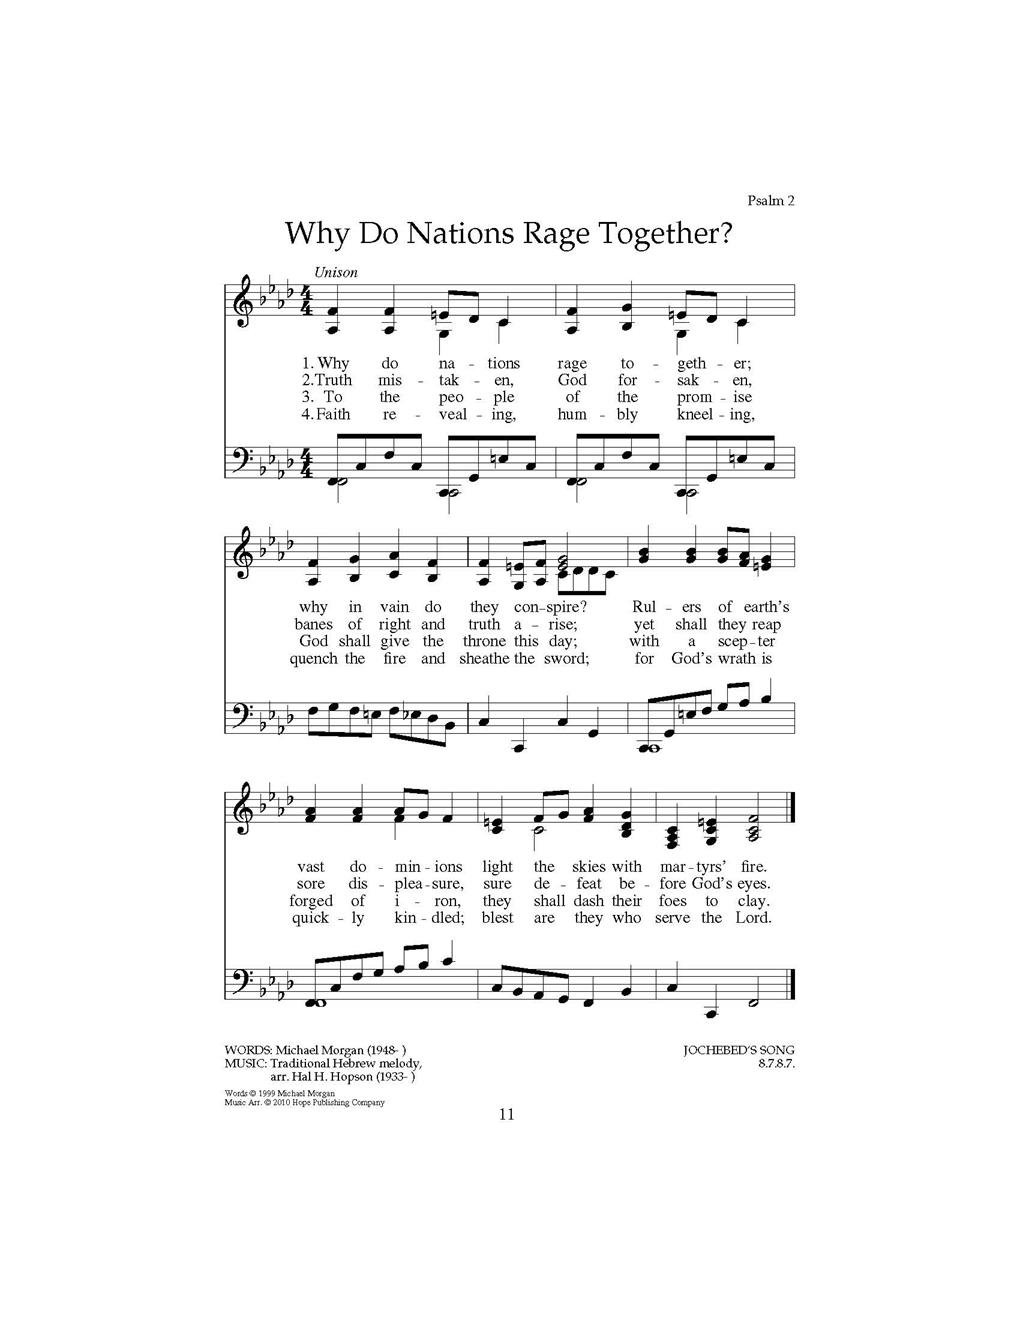 Why Do Nations Rage Together Cover Image